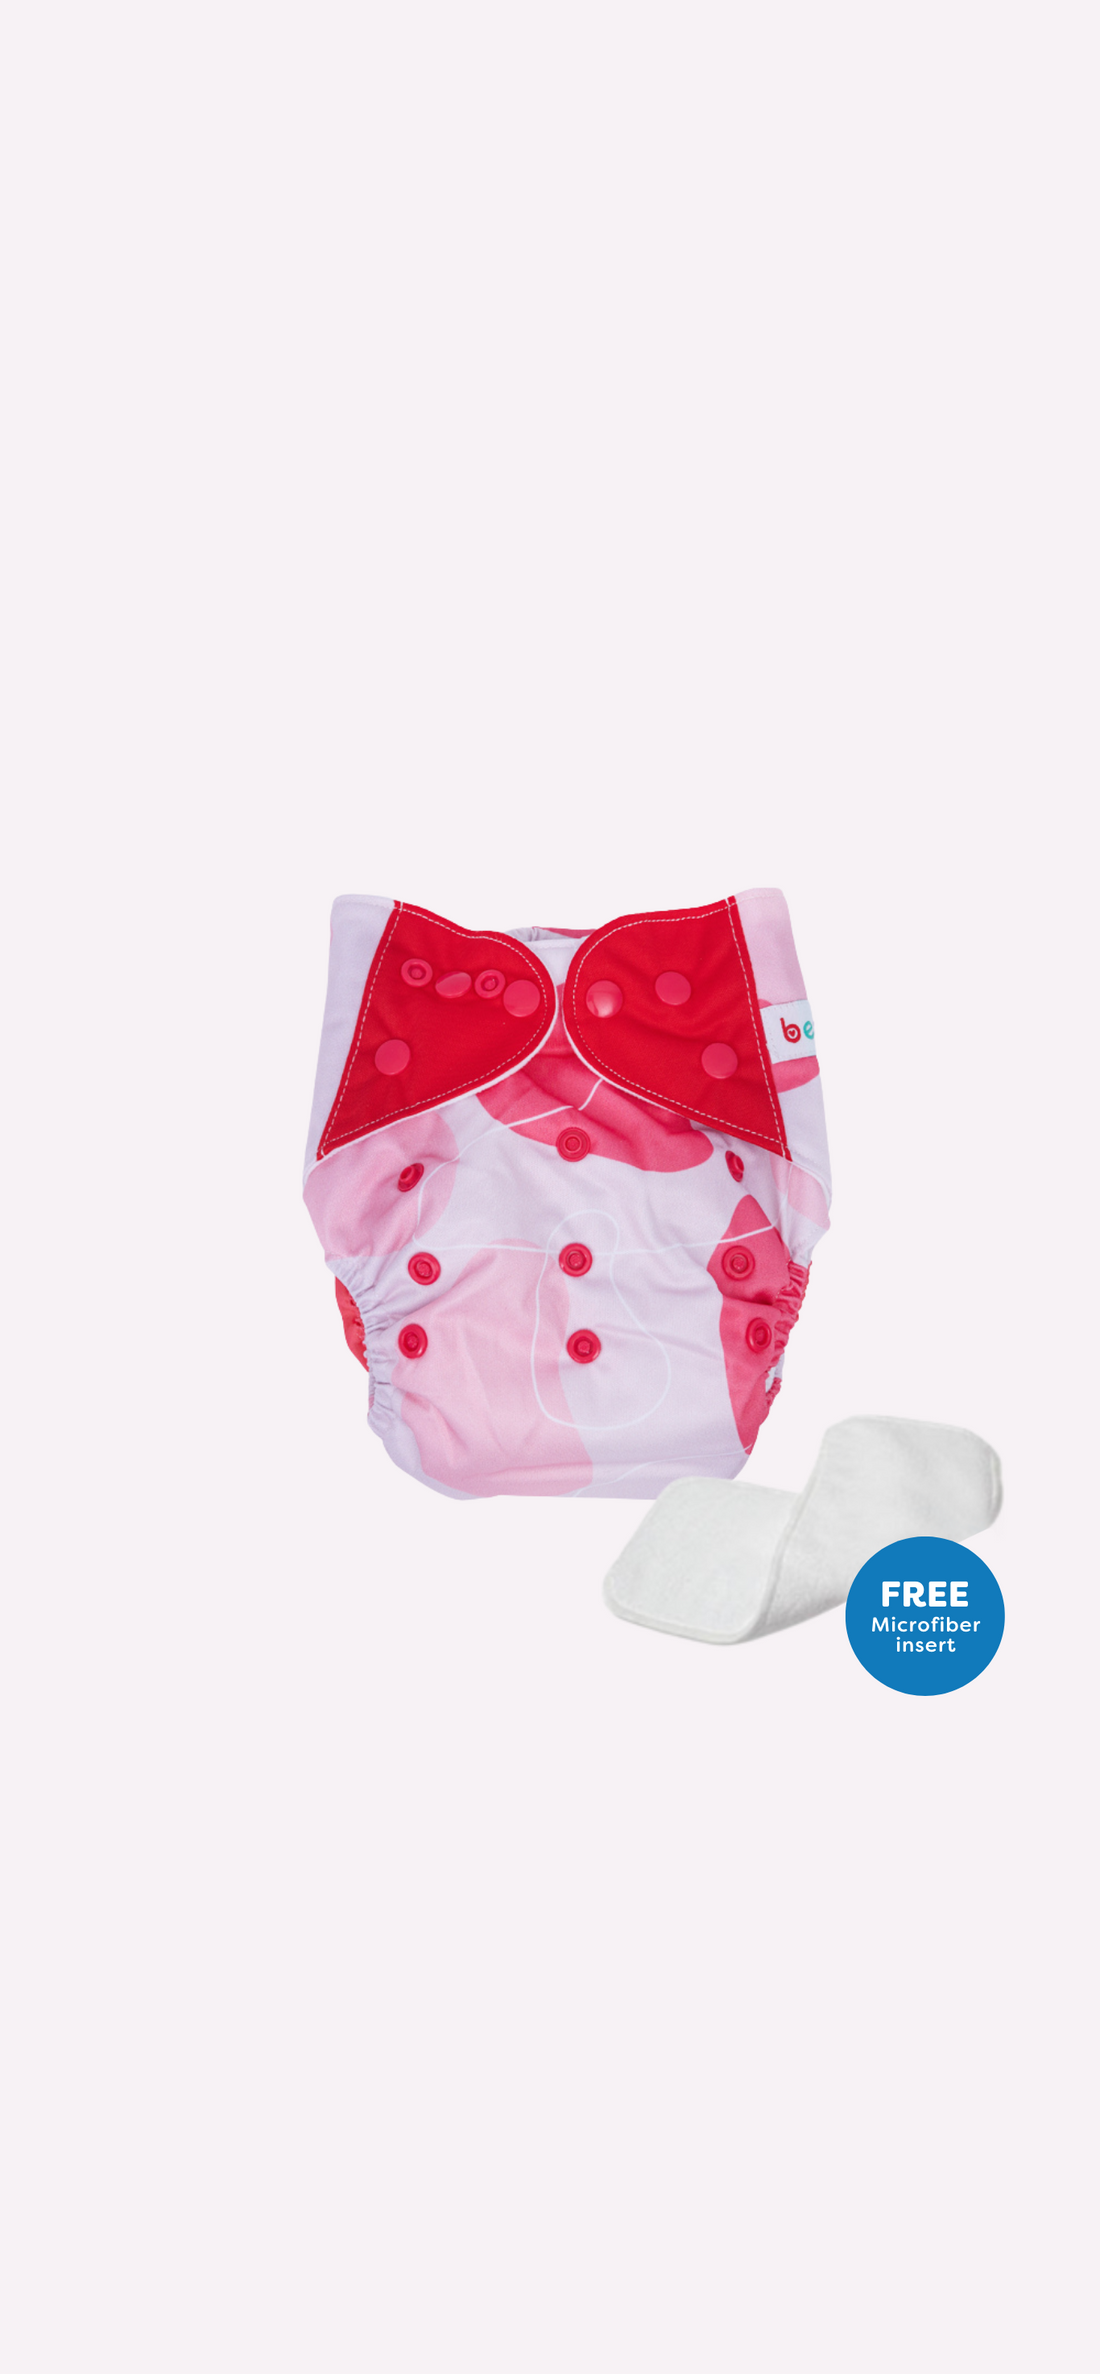 Snappies Little Bean Red Cloth Diaper